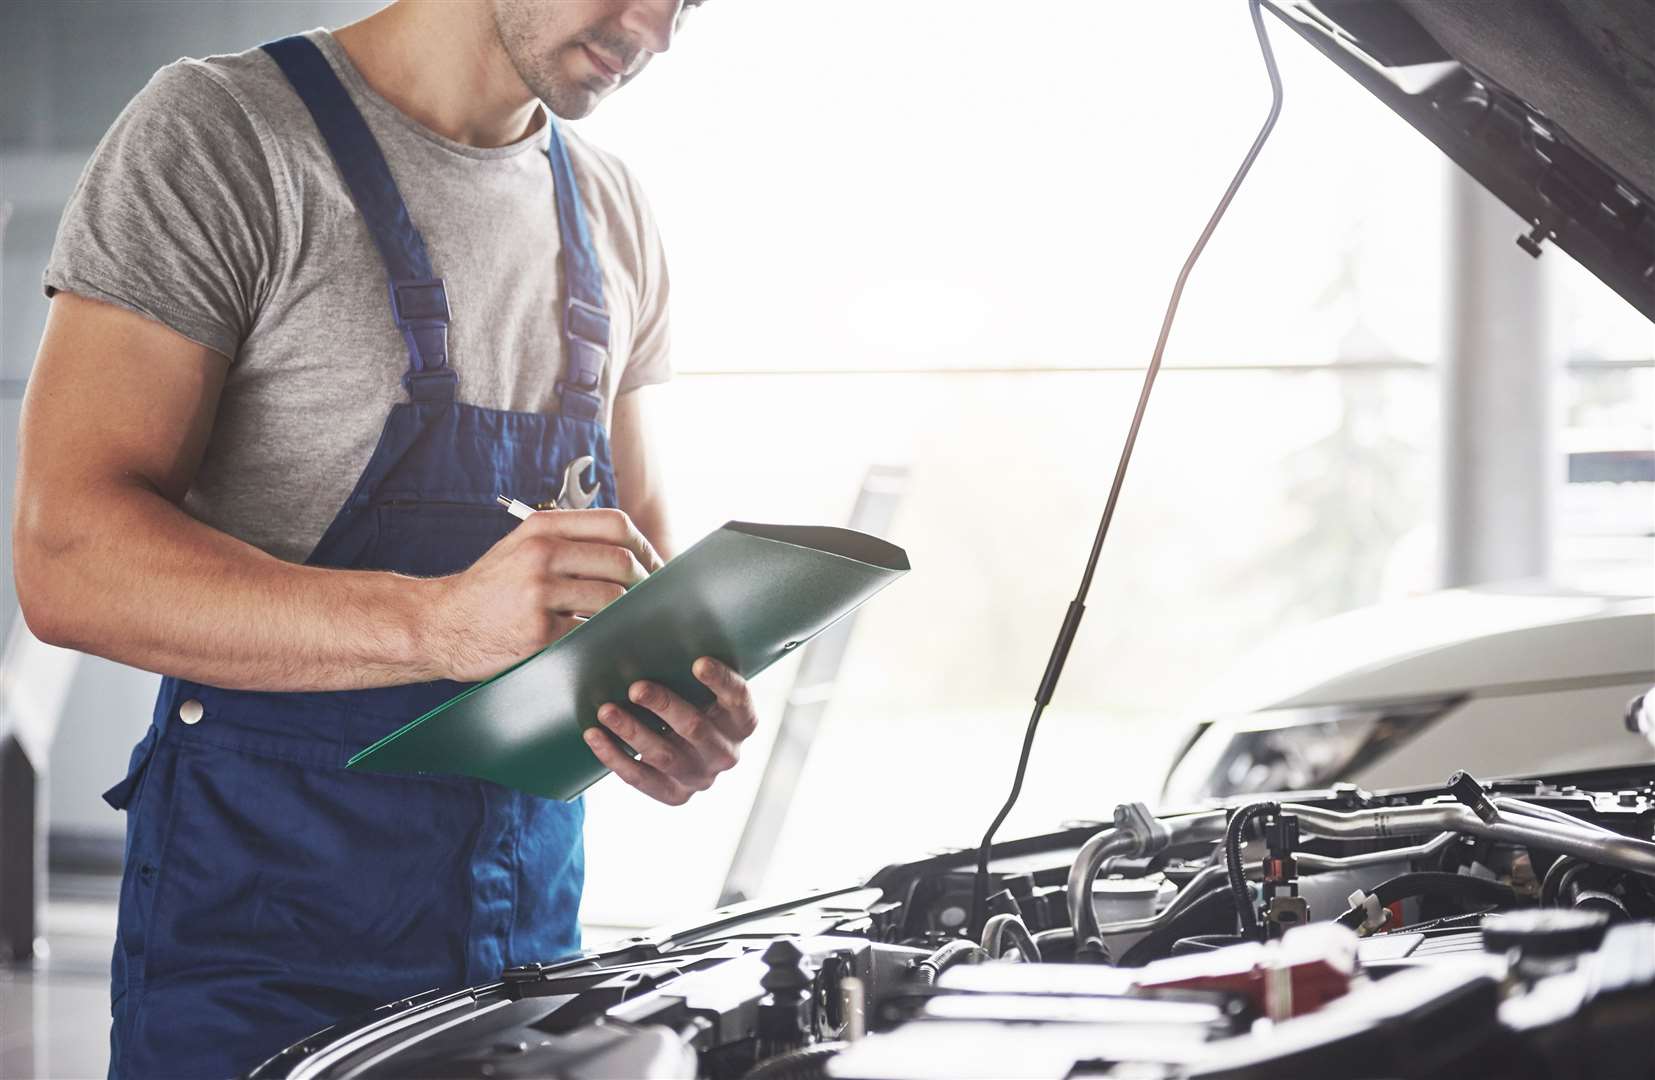 The rising cost of repairs is contributing to the increase. Image: iStock.